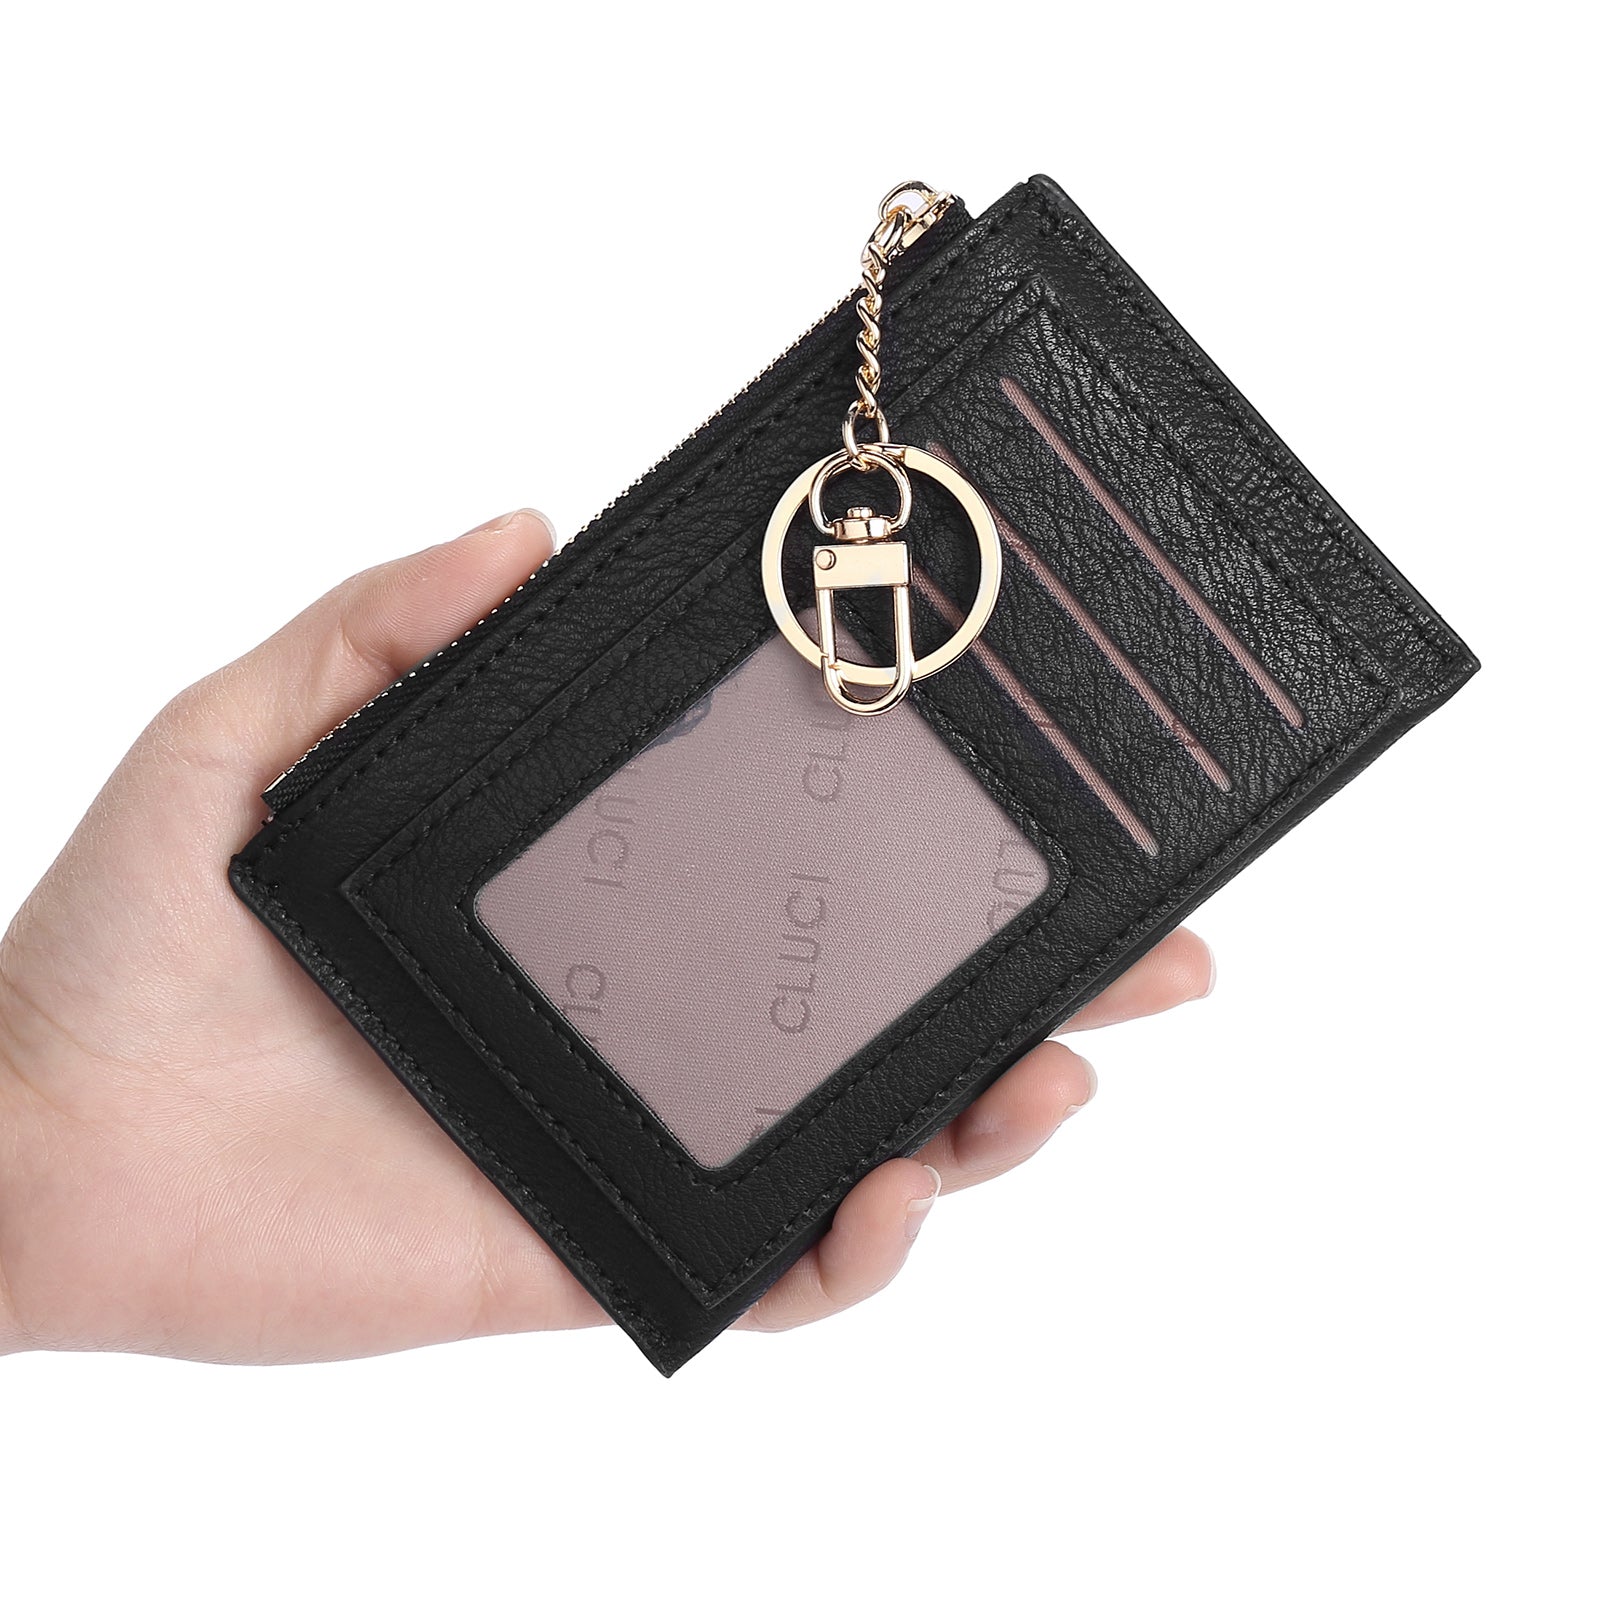 CLUCI Womens Small Leather Wallet Coin Slim Zipper Pocket Credit Card Holder with Keychain